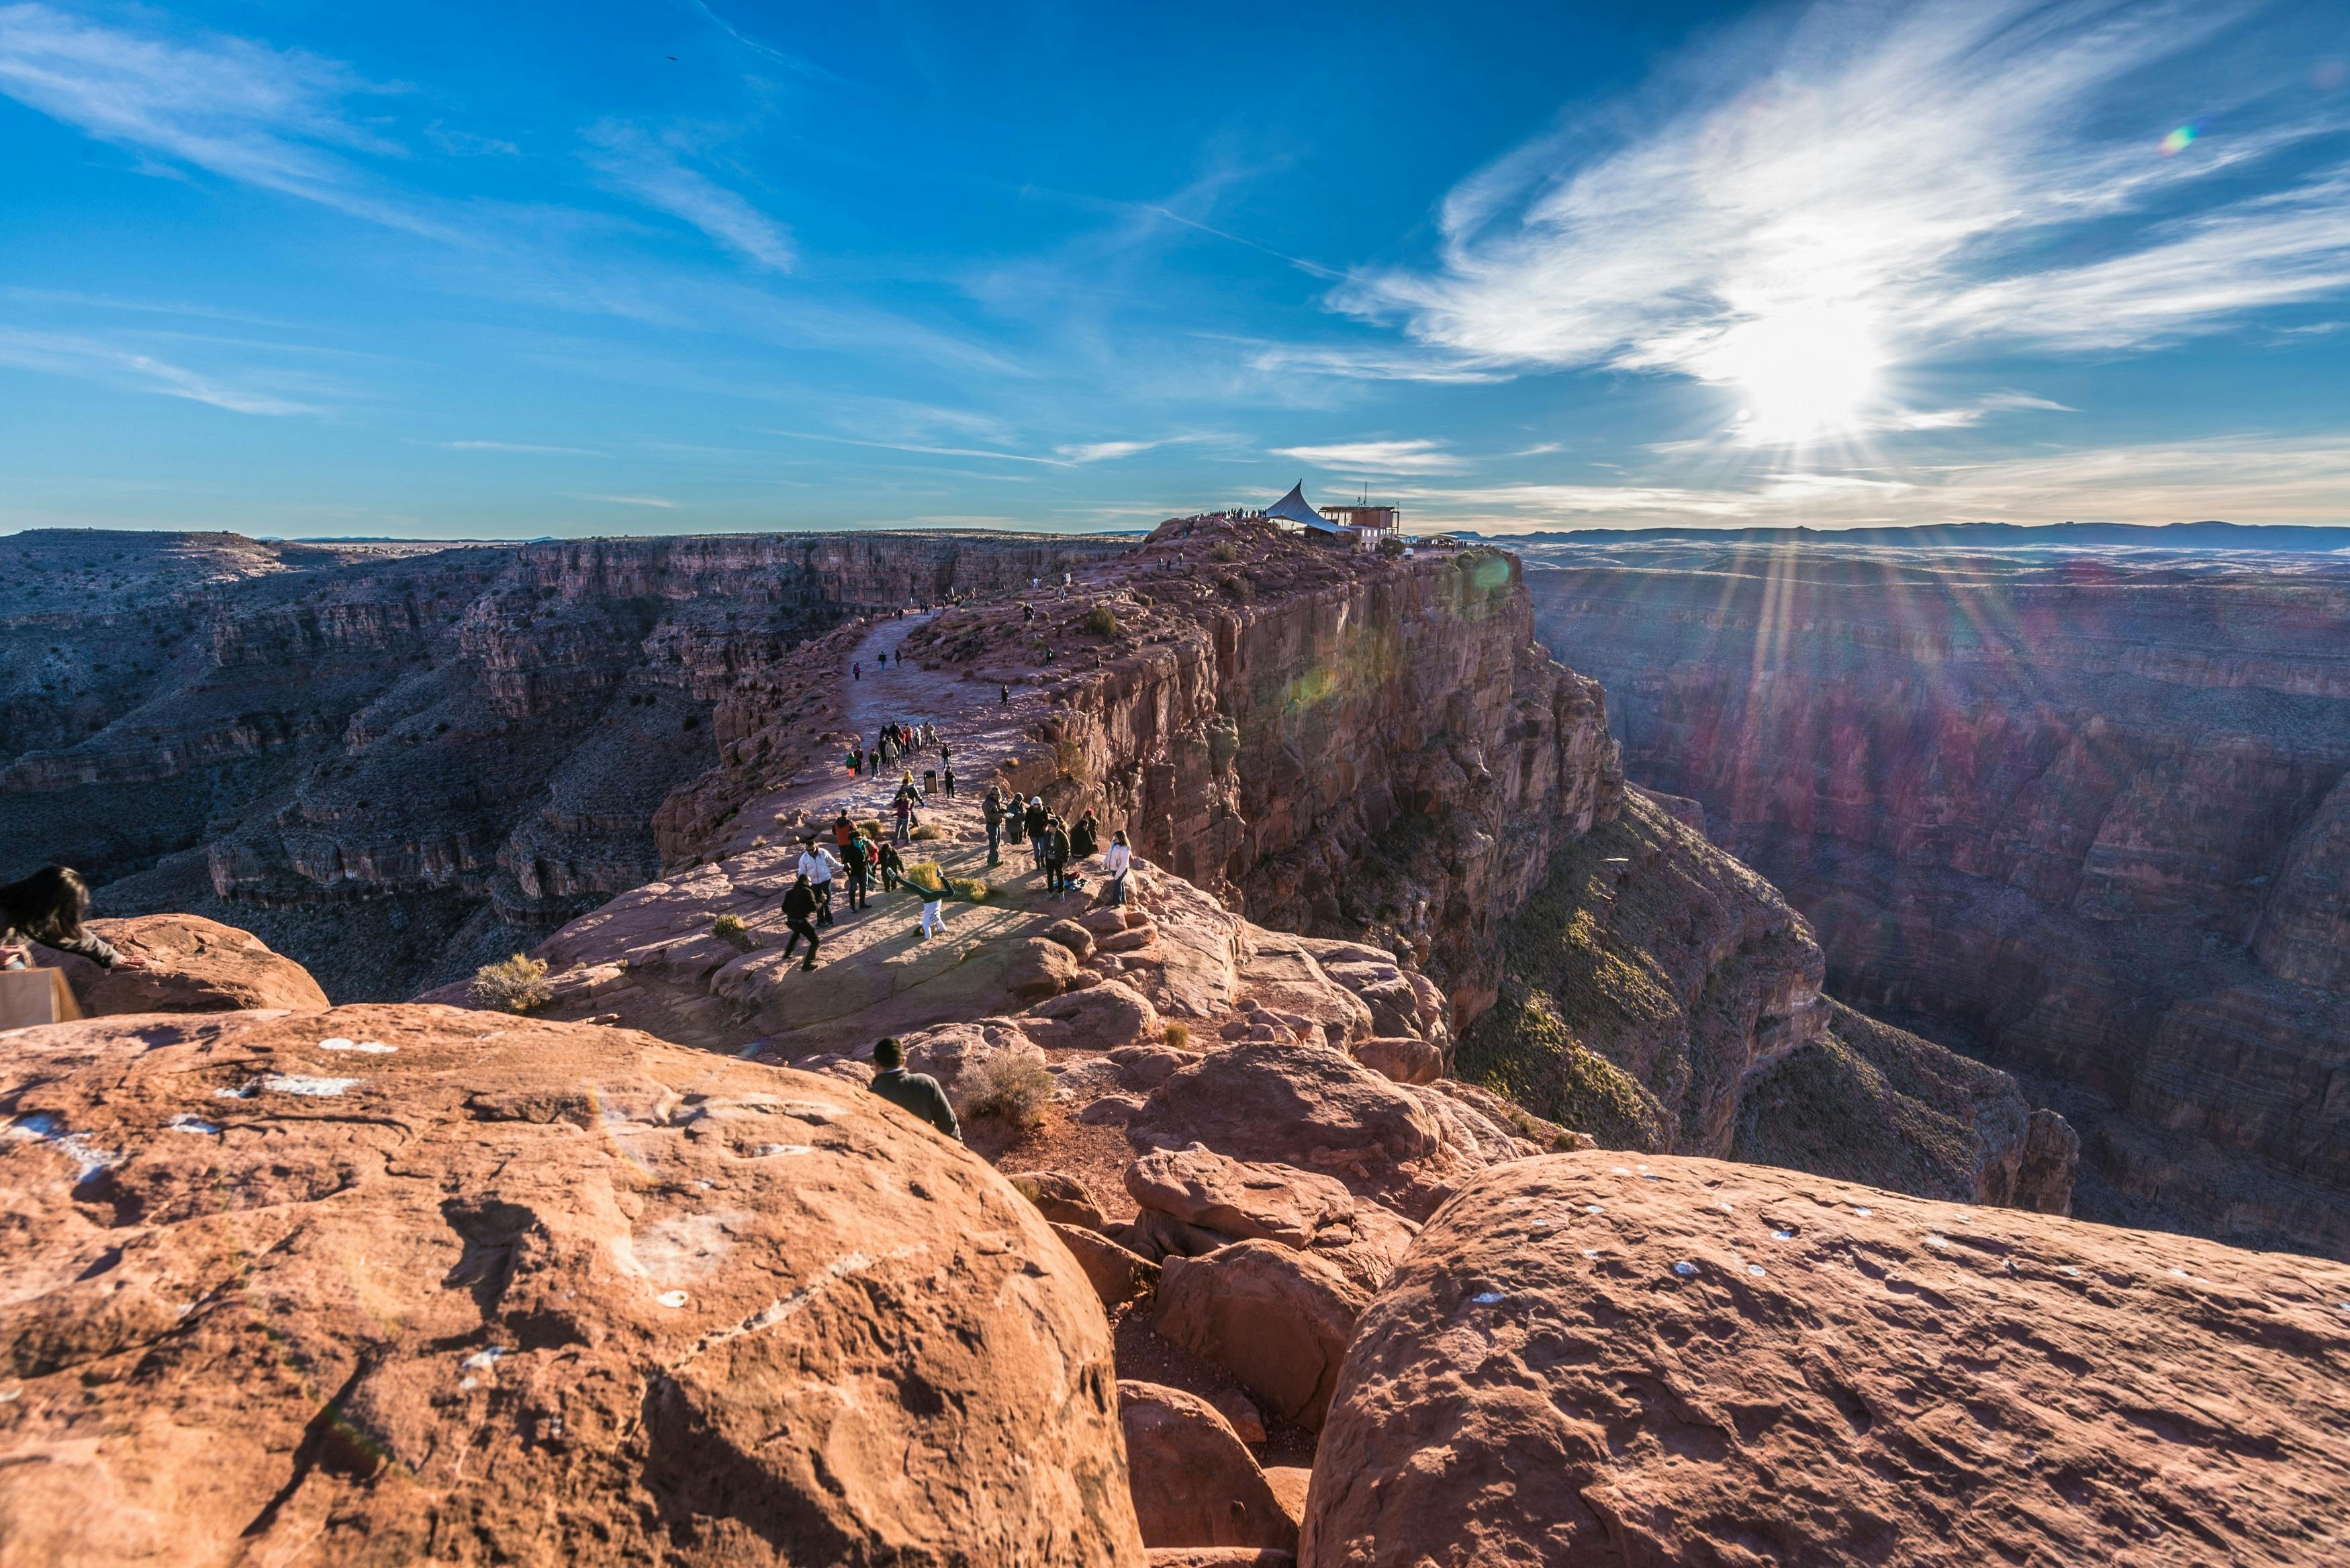 Grand Canyon West Rim small-group tour from Las Vegas